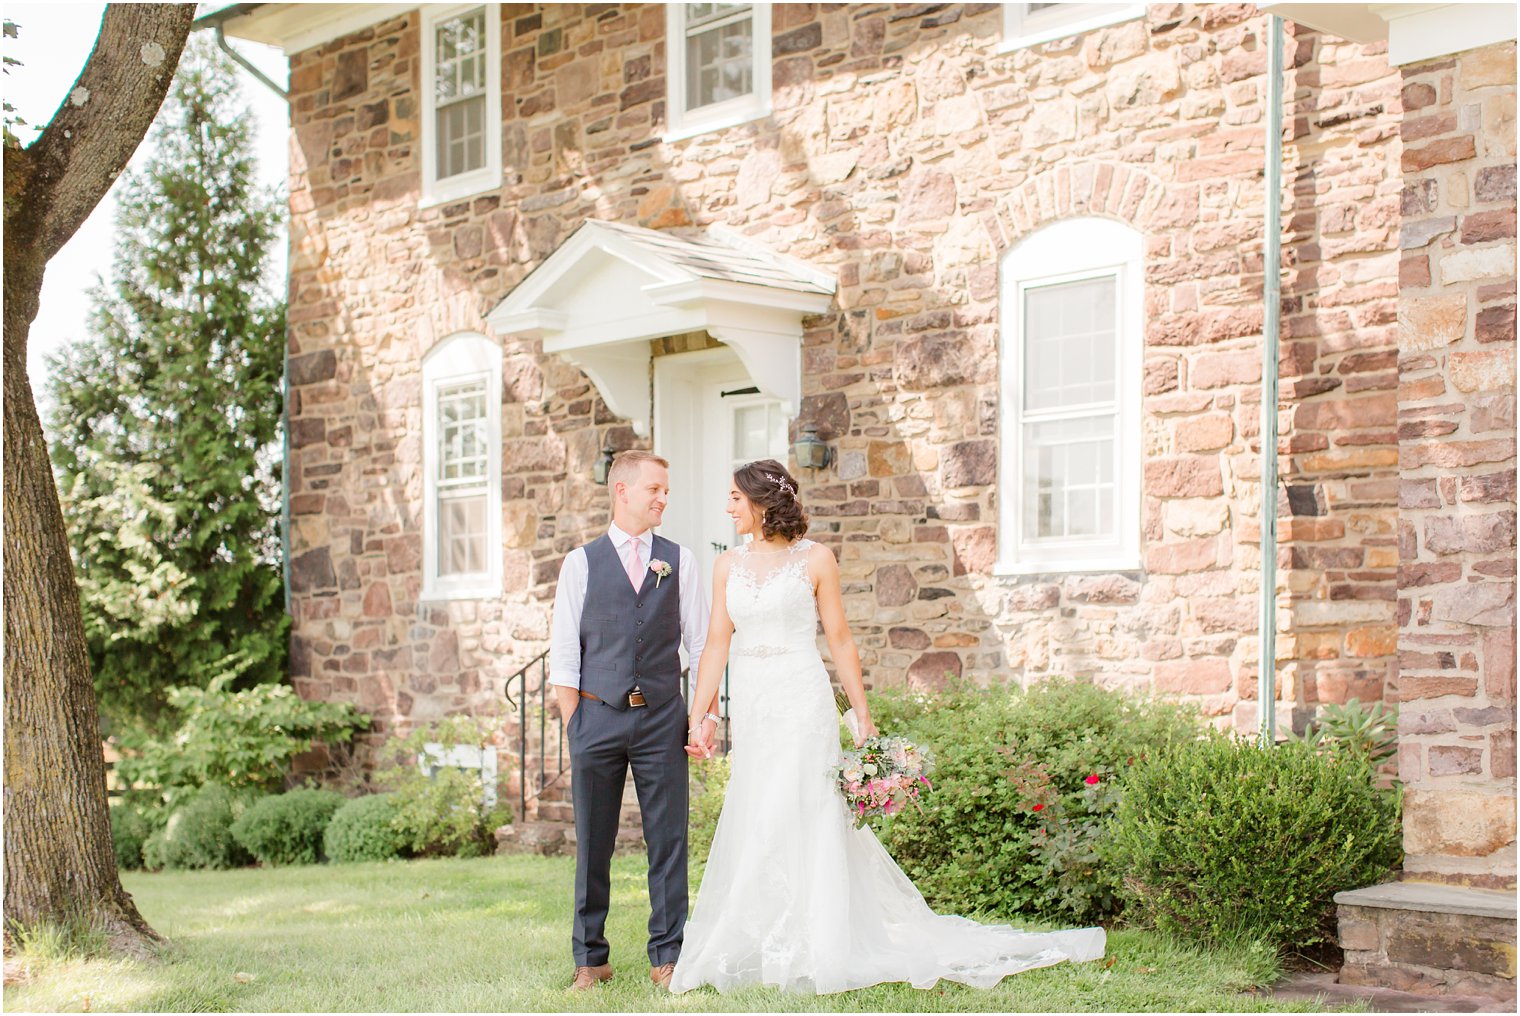 Classic photos of bride and groom at Stone Rows Farm wedding